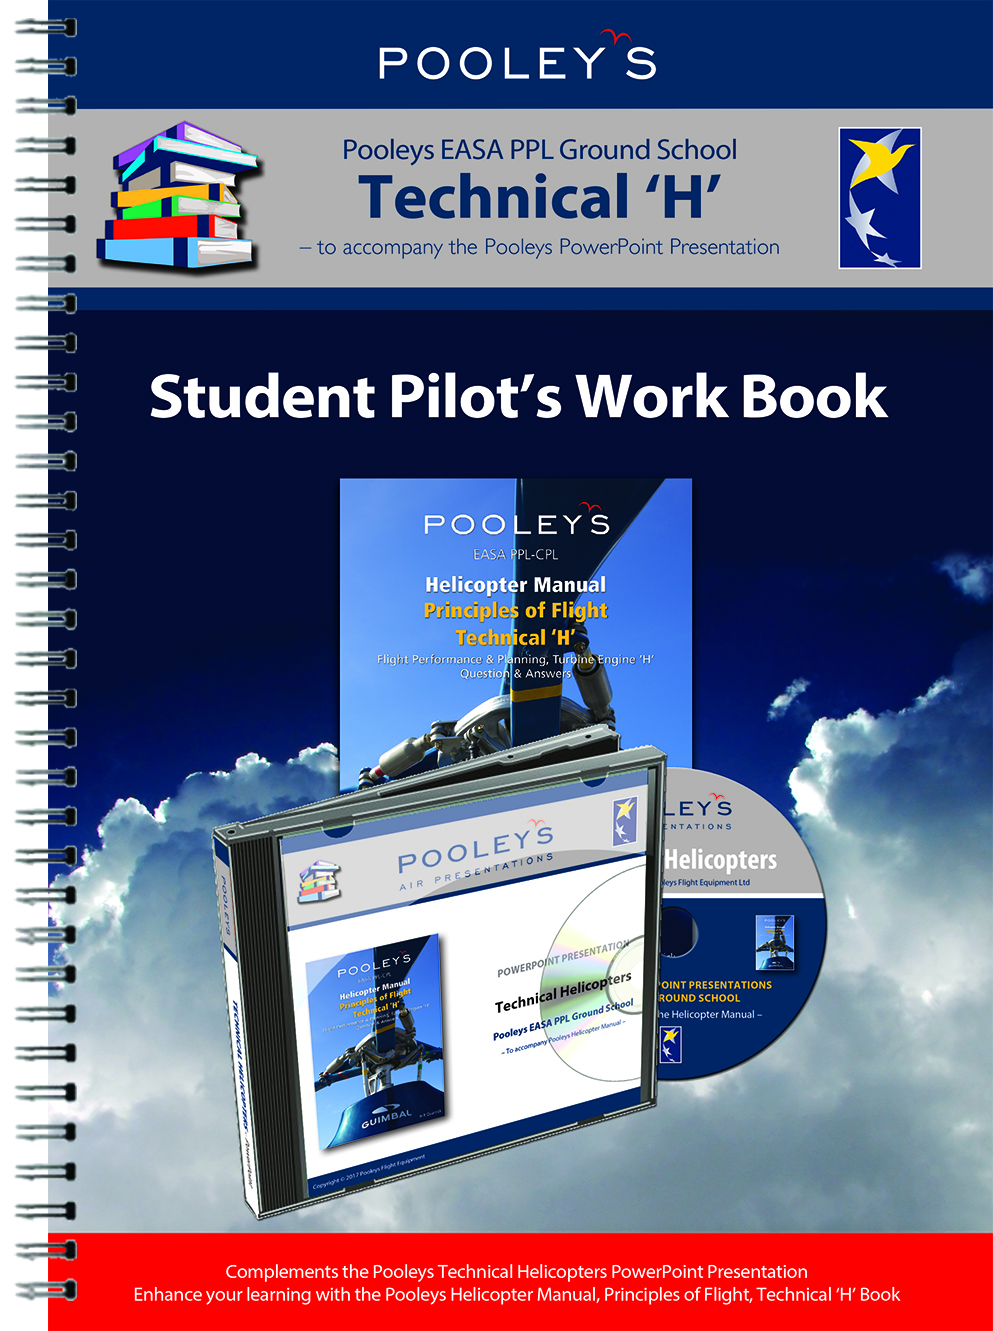 Pooleys Air Presentations – Technical Helicopter Student Pilot's Work Book (b/w, no text)